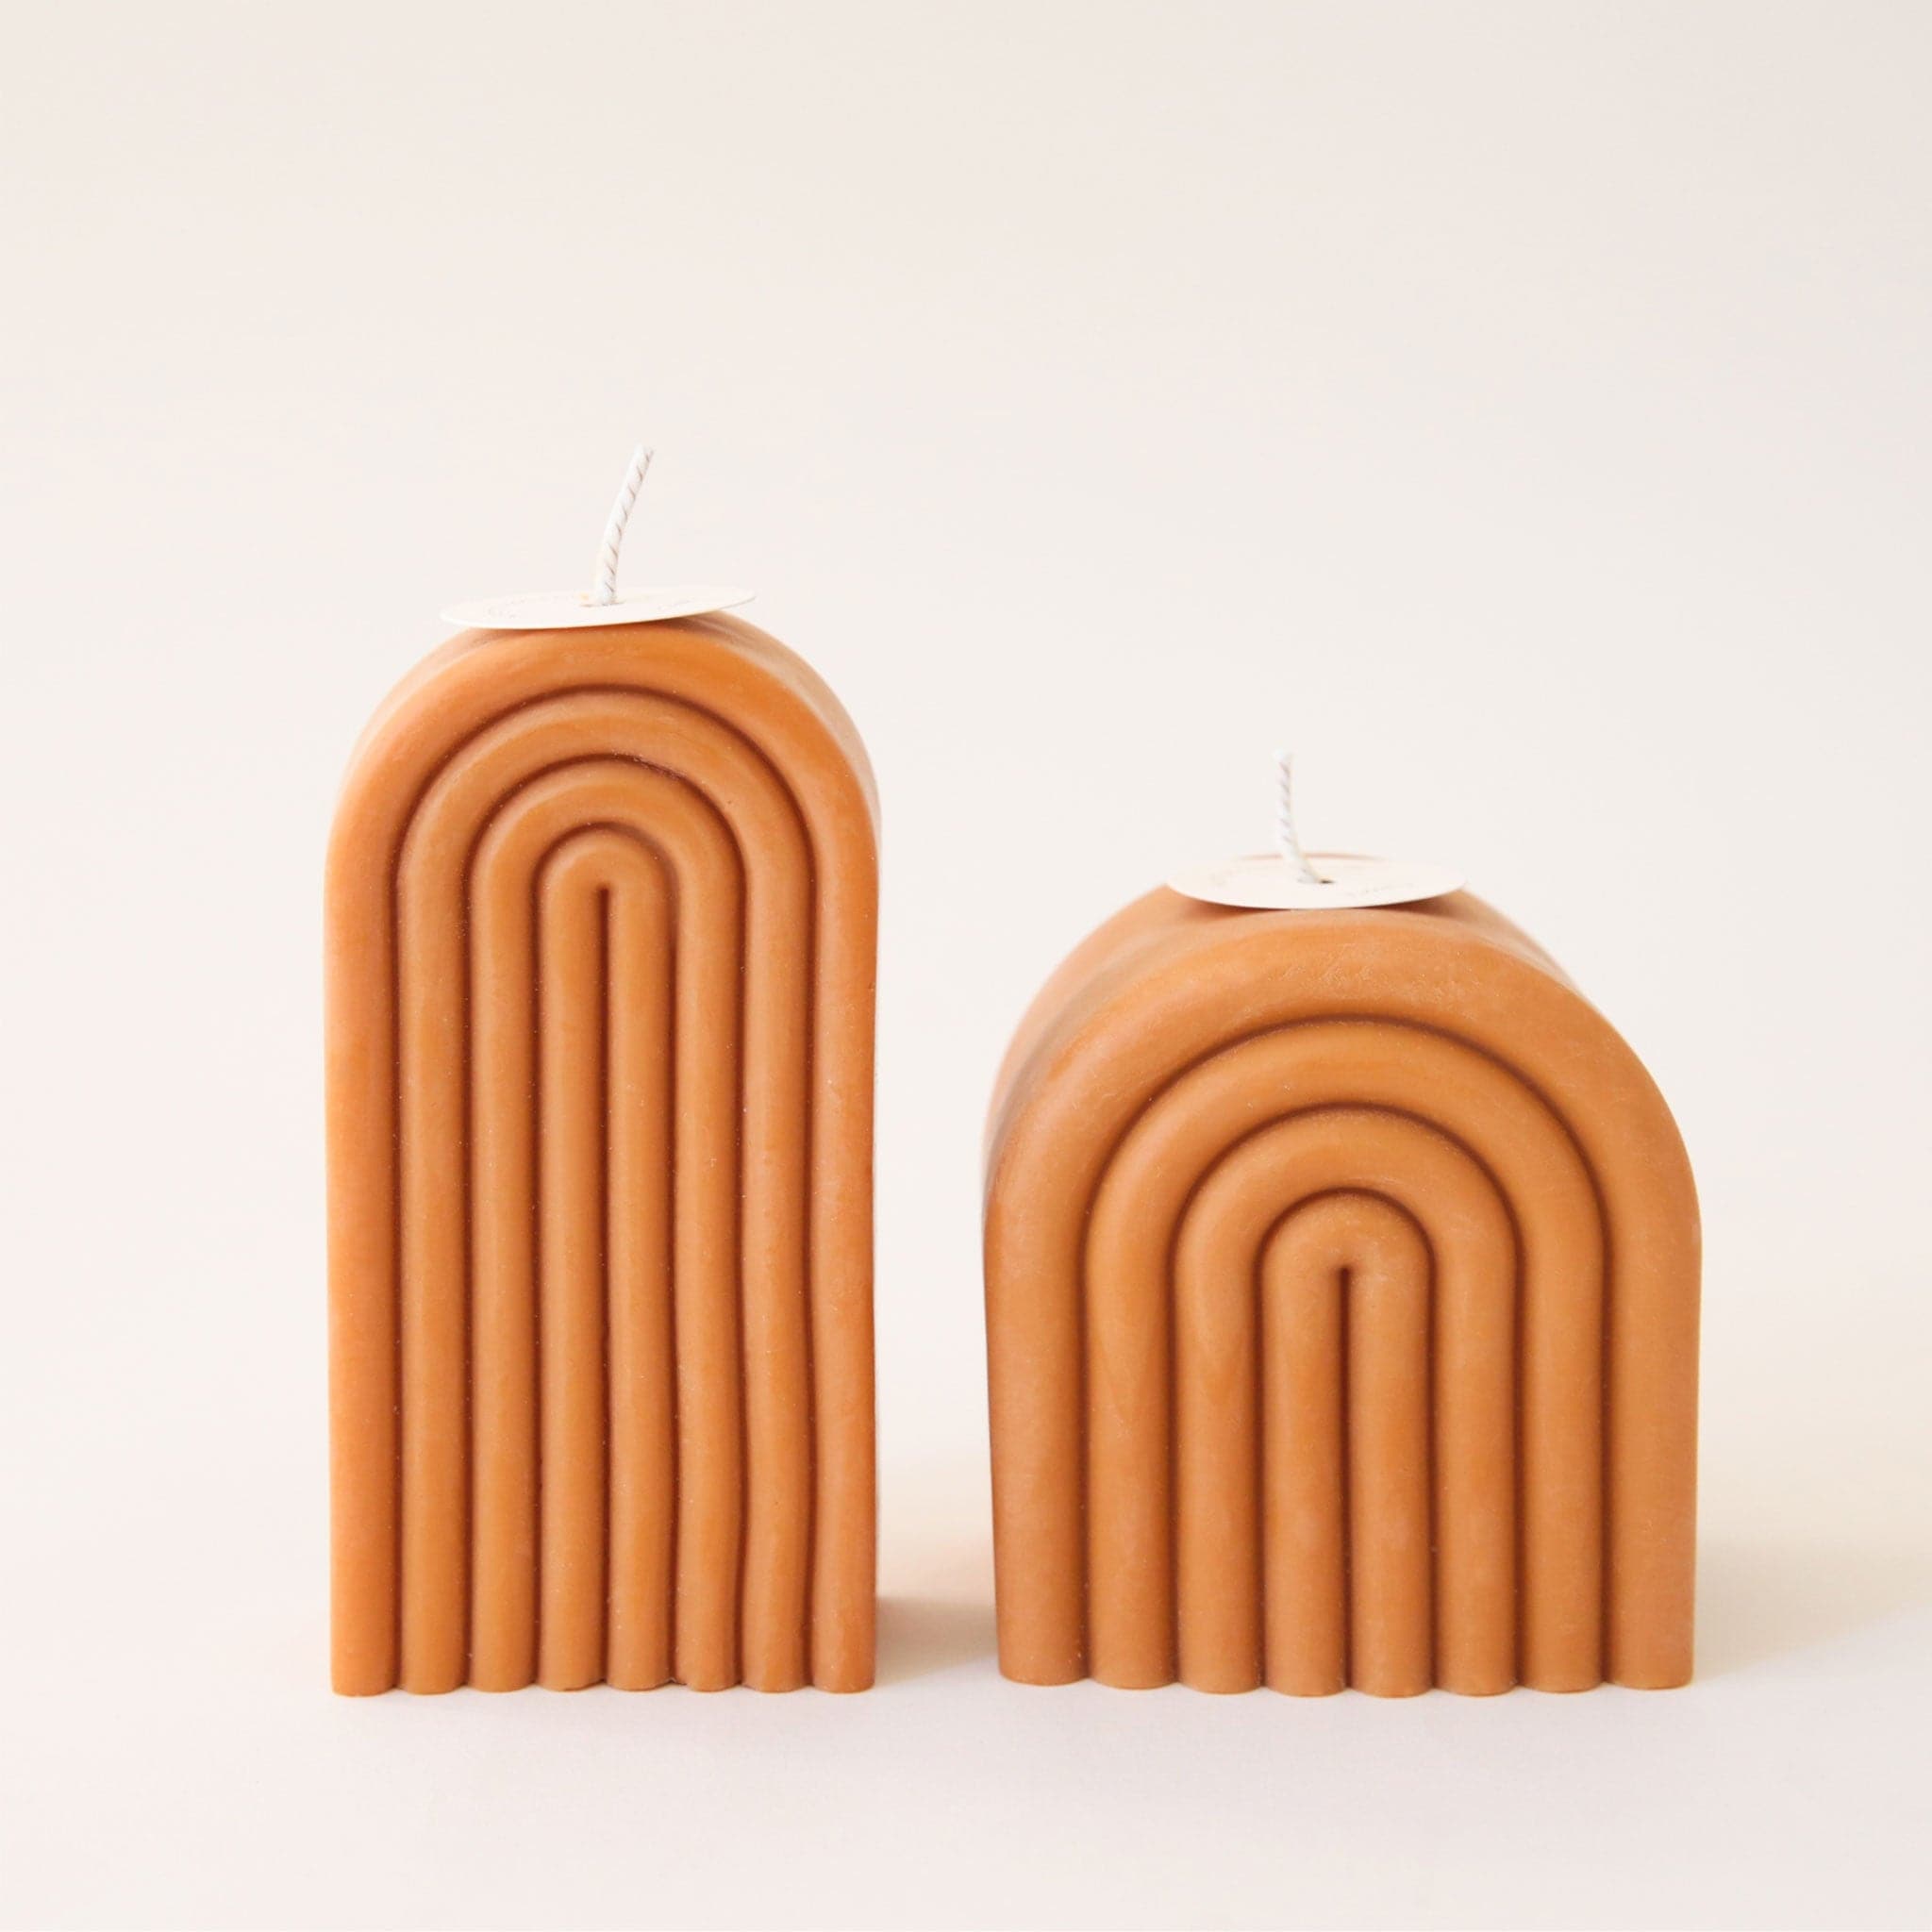 Two caramel colored arch shaped candles, one tall and one short. Each is carved with rainbow-shaped curves and has its own white wick sprouting from the top. 